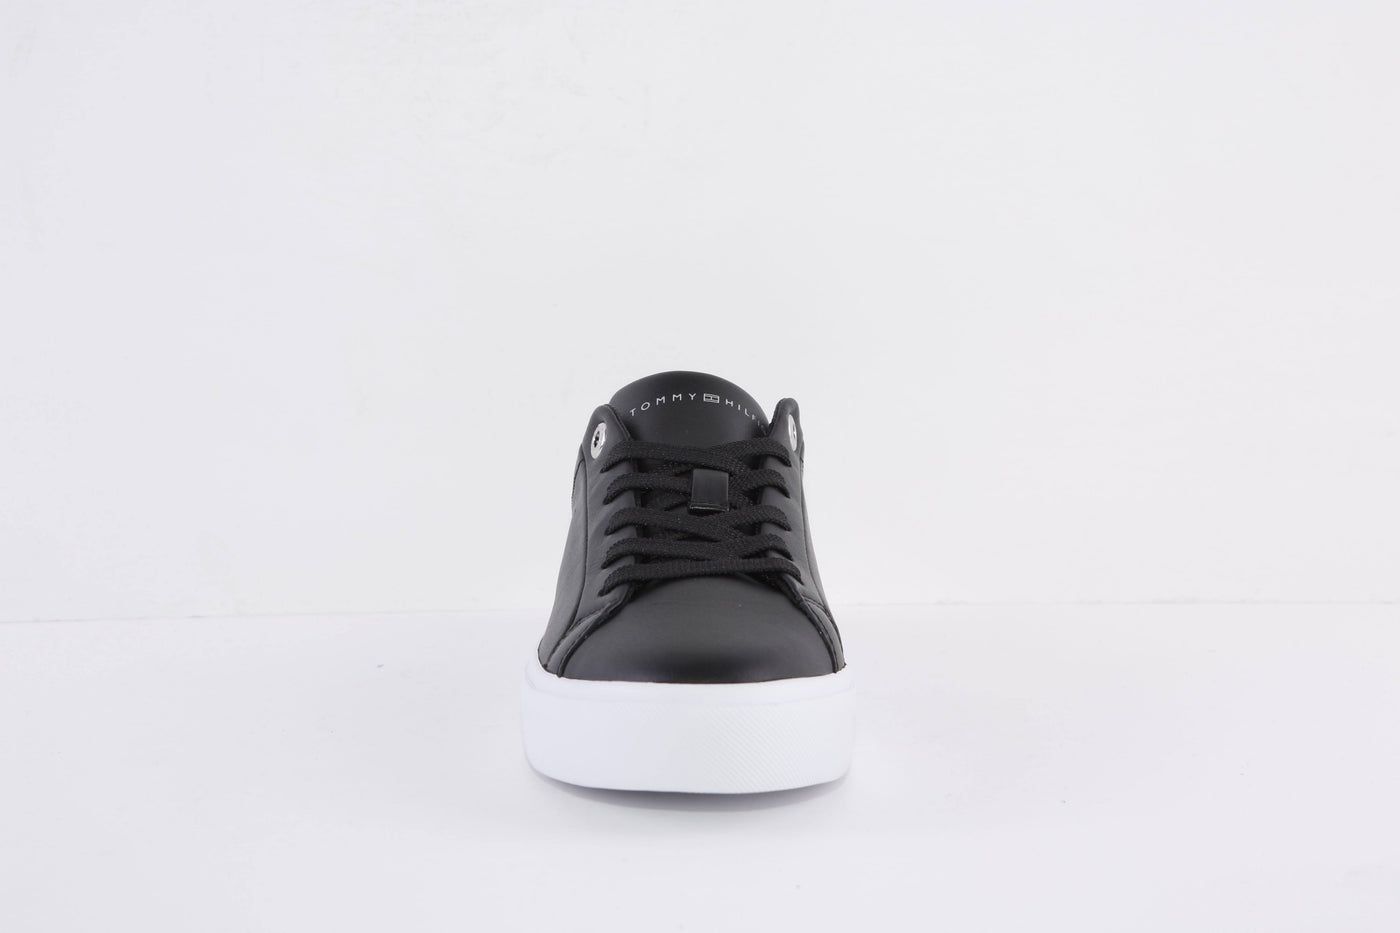 TOMMY HILFIGER - TH BRANDED FOXING LACED TRAINER - BLACK